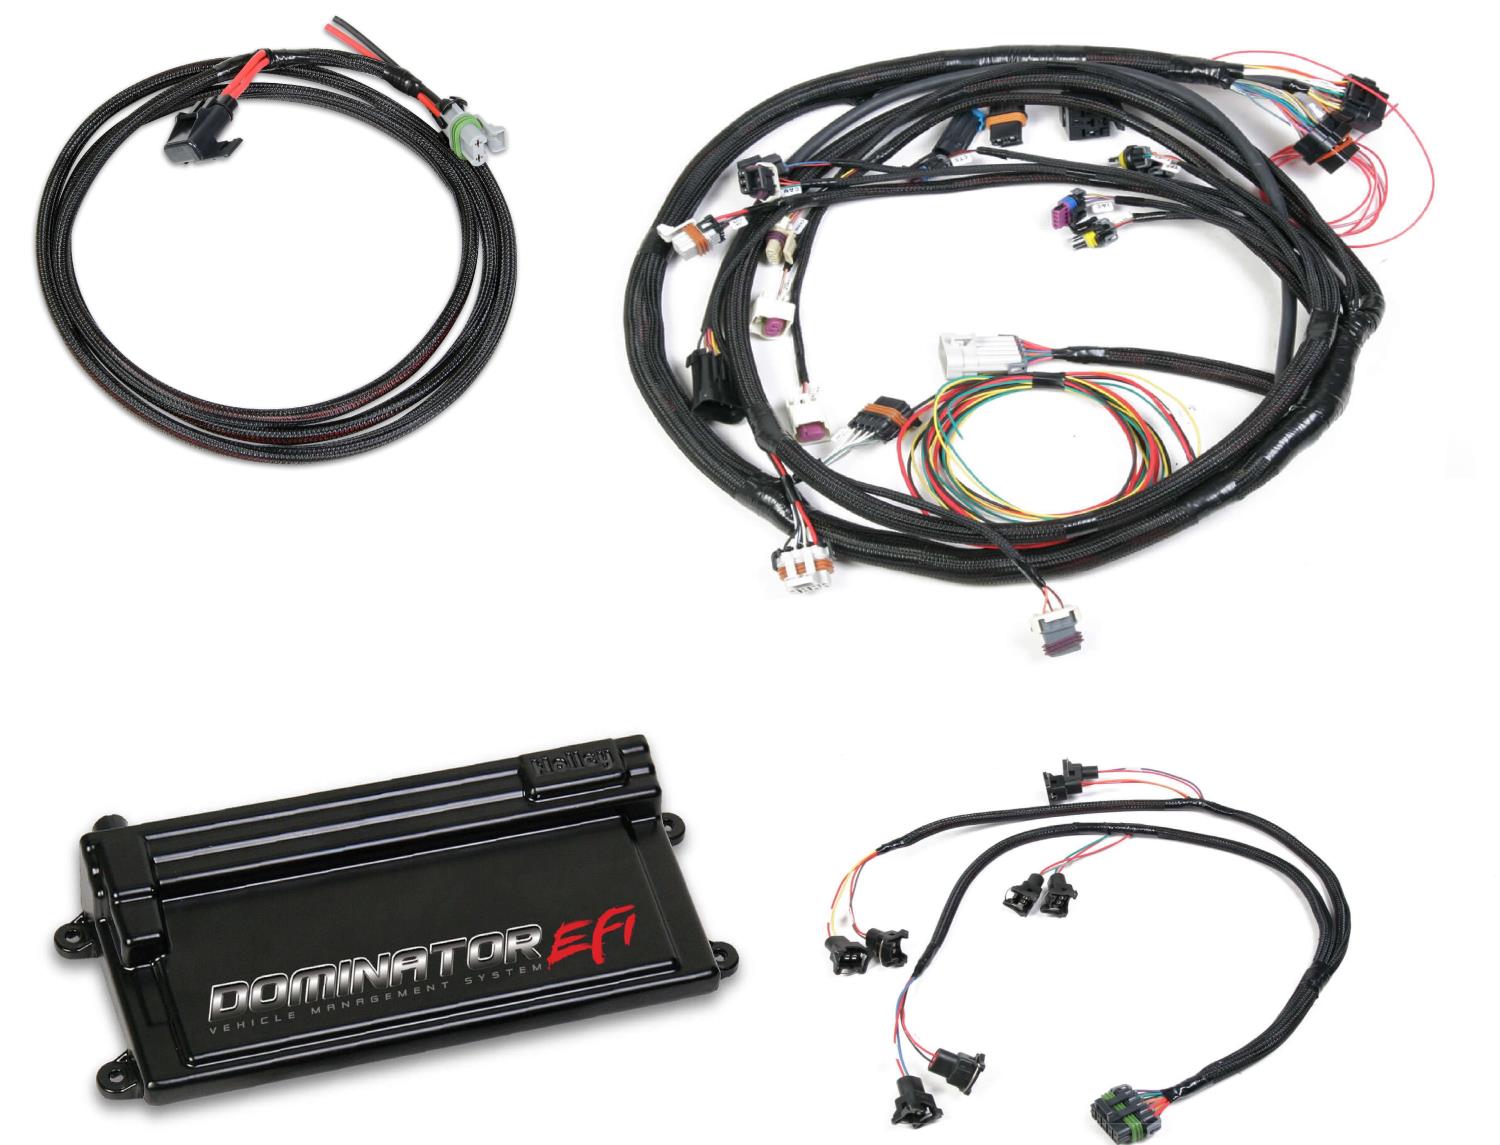 Dominator EFI ECU with Universal (Chevy & Chrysler Engines) Main Harness and EV1 Injector Harness